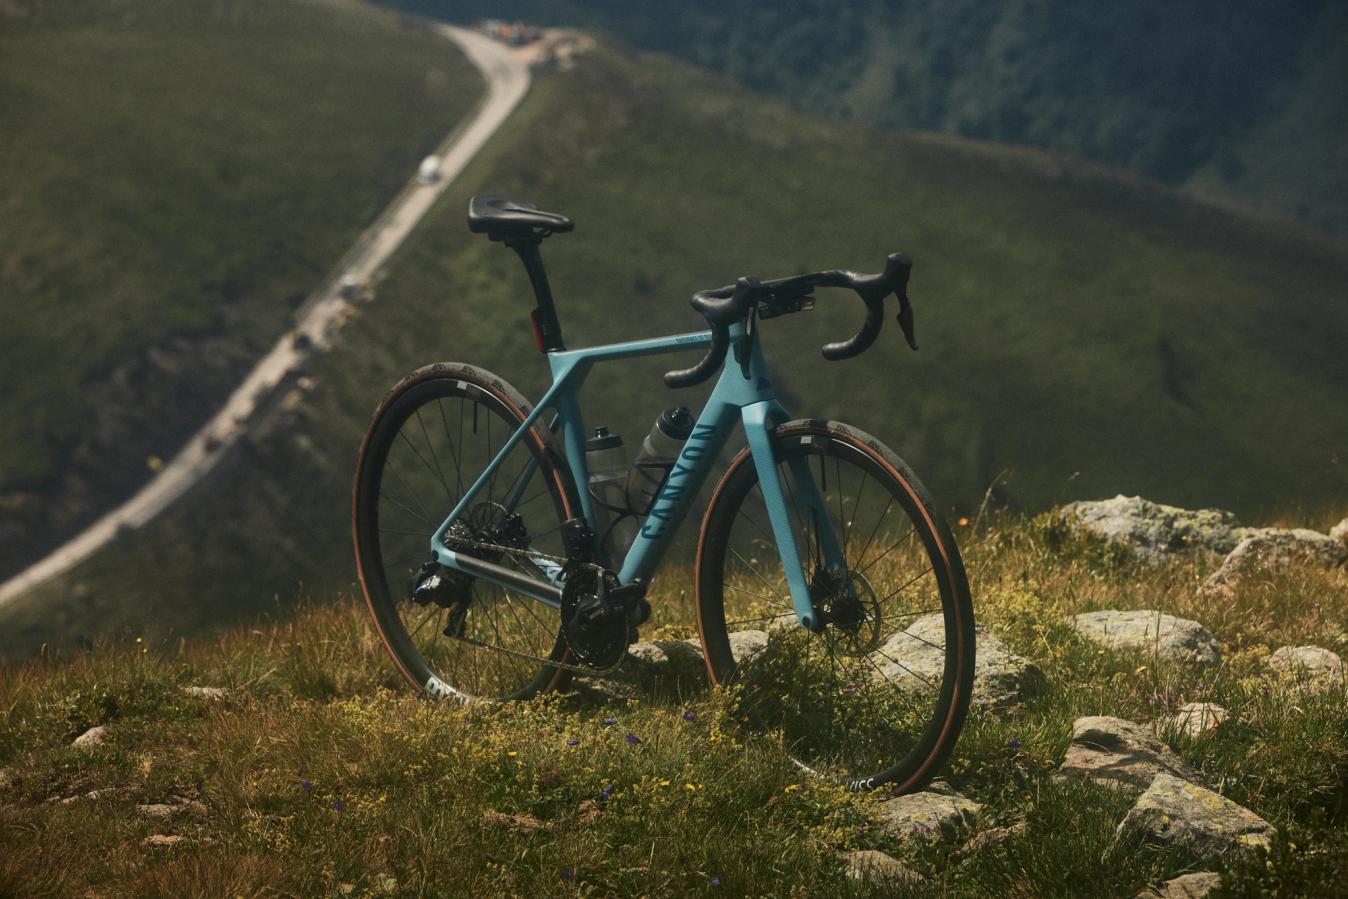 Canyon have designed the new Endurace with versatility in mind with the frame accommodating up to a 35mm tyre.  